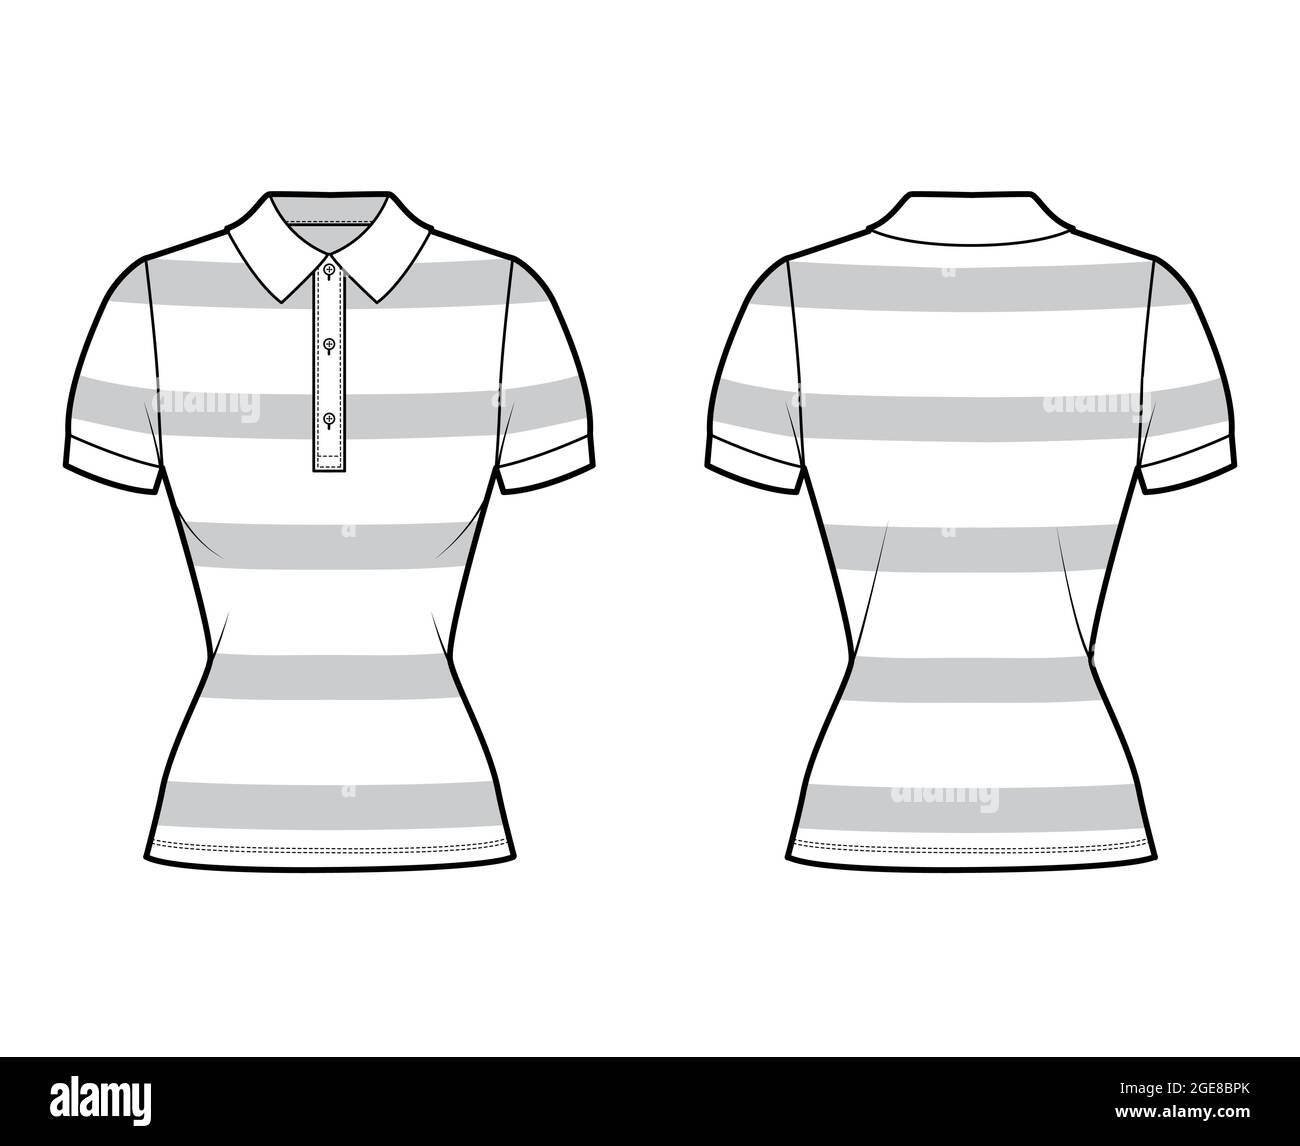 Shirt rugby stripes technical fashion illustration with short sleeves, tunic length,, fitted body, collar. Apparel top outwear template front, back, white color style. Women, men, unisex CAD mockup Stock Vector